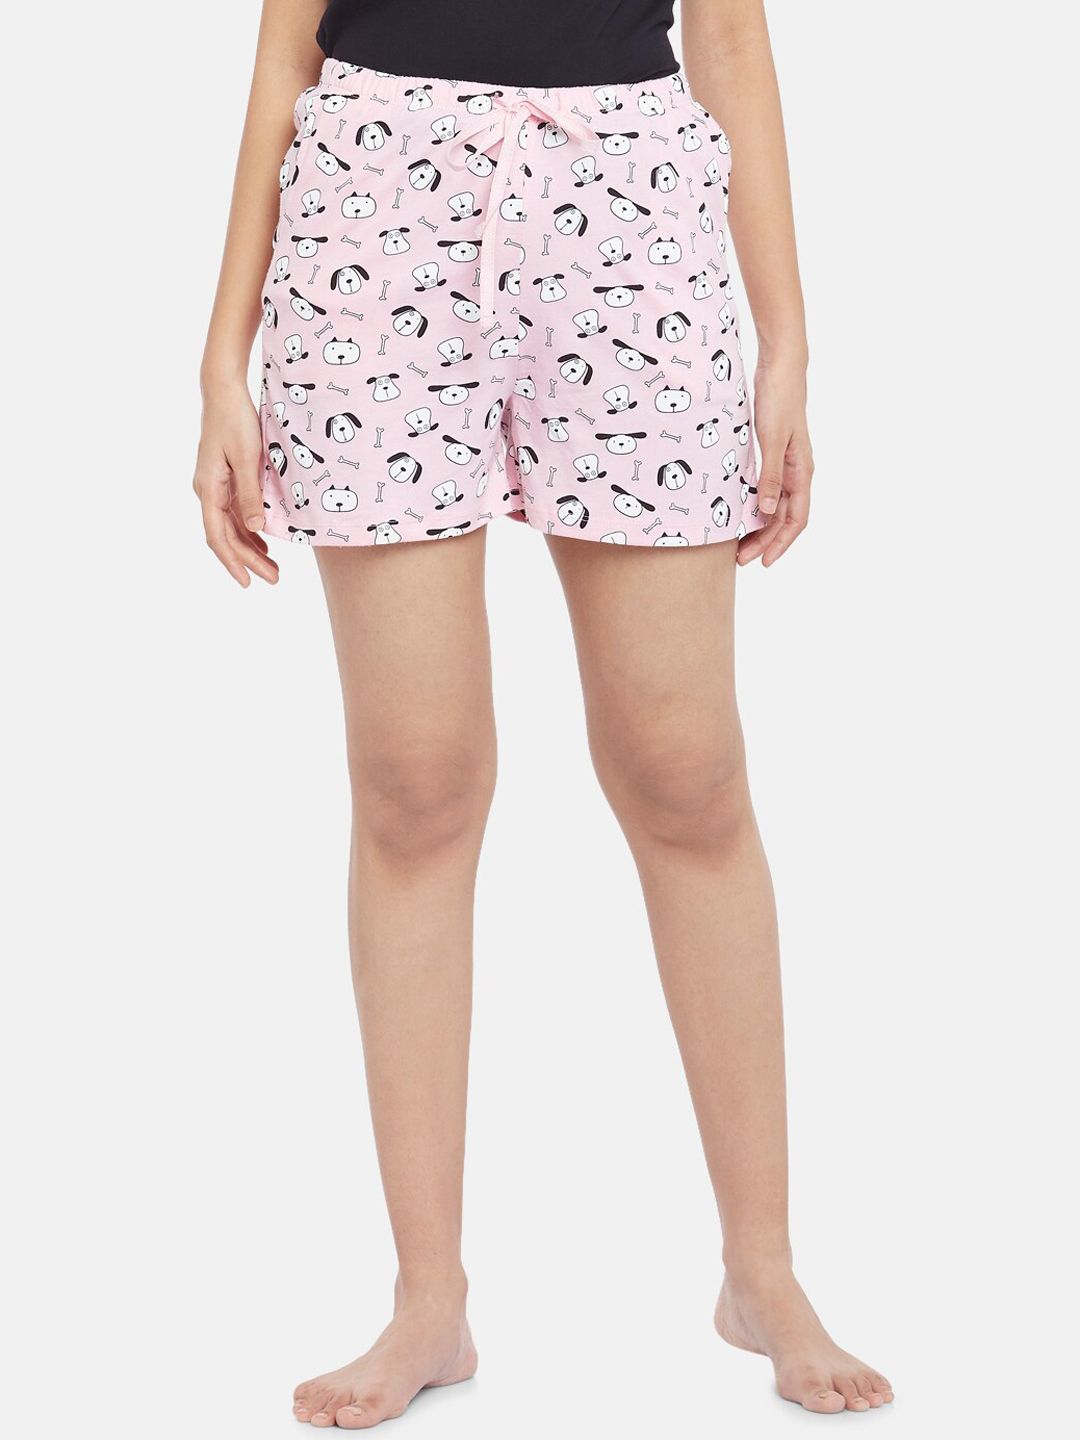 Dreamz by Pantaloons Women Pink Conversational Printed Cotton Lounge Shorts Price in India